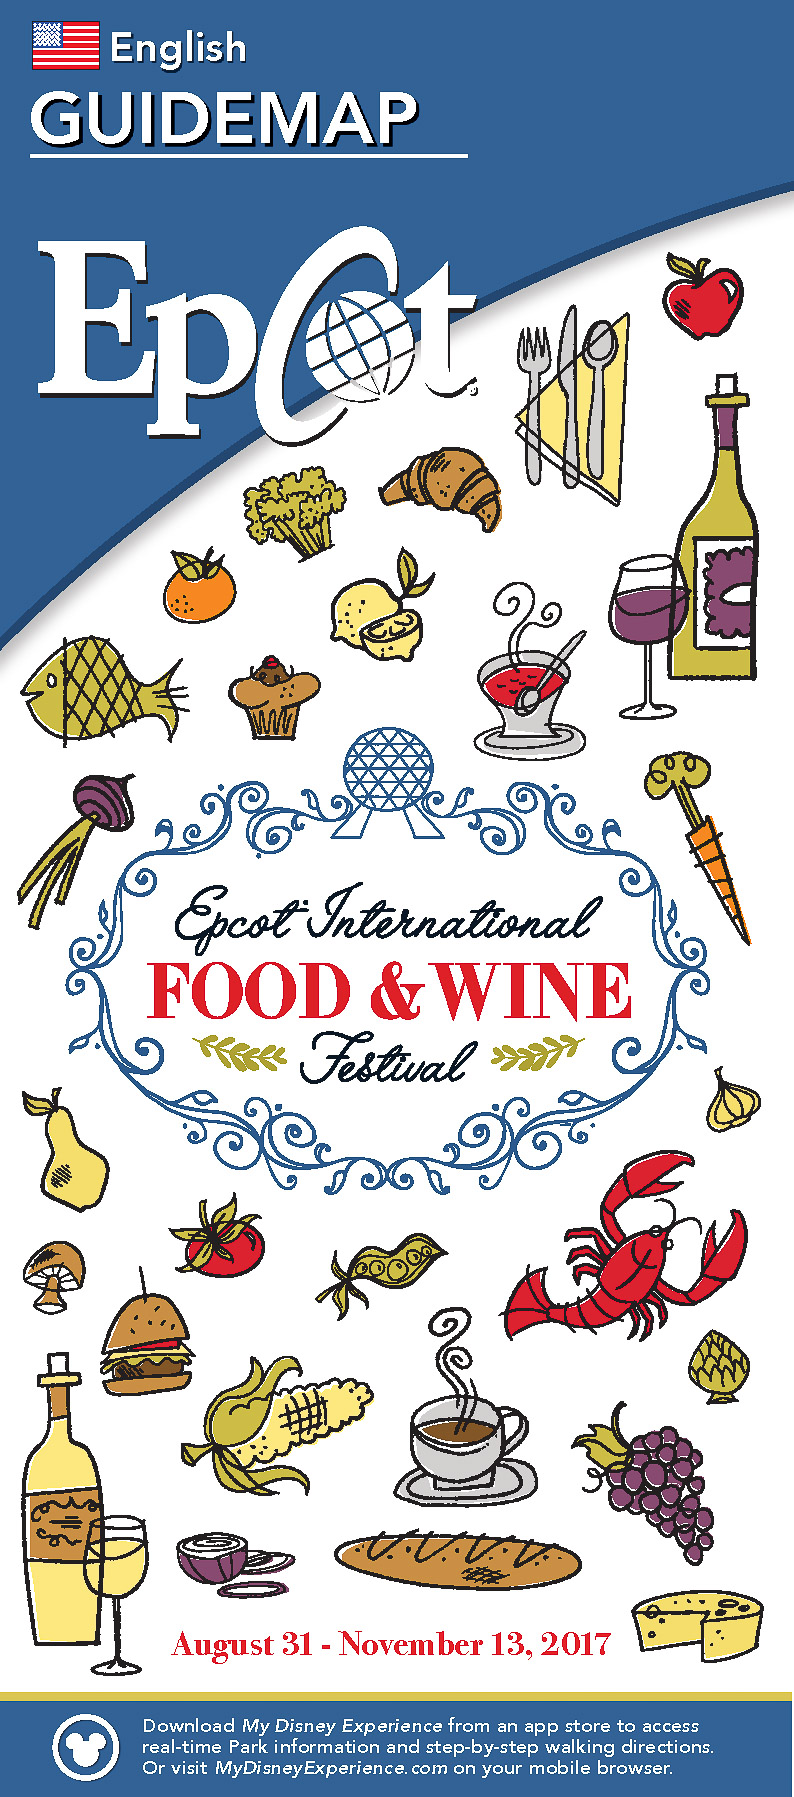 The 2017 Epcot International Food & Wine Festival Guidemap is Here!